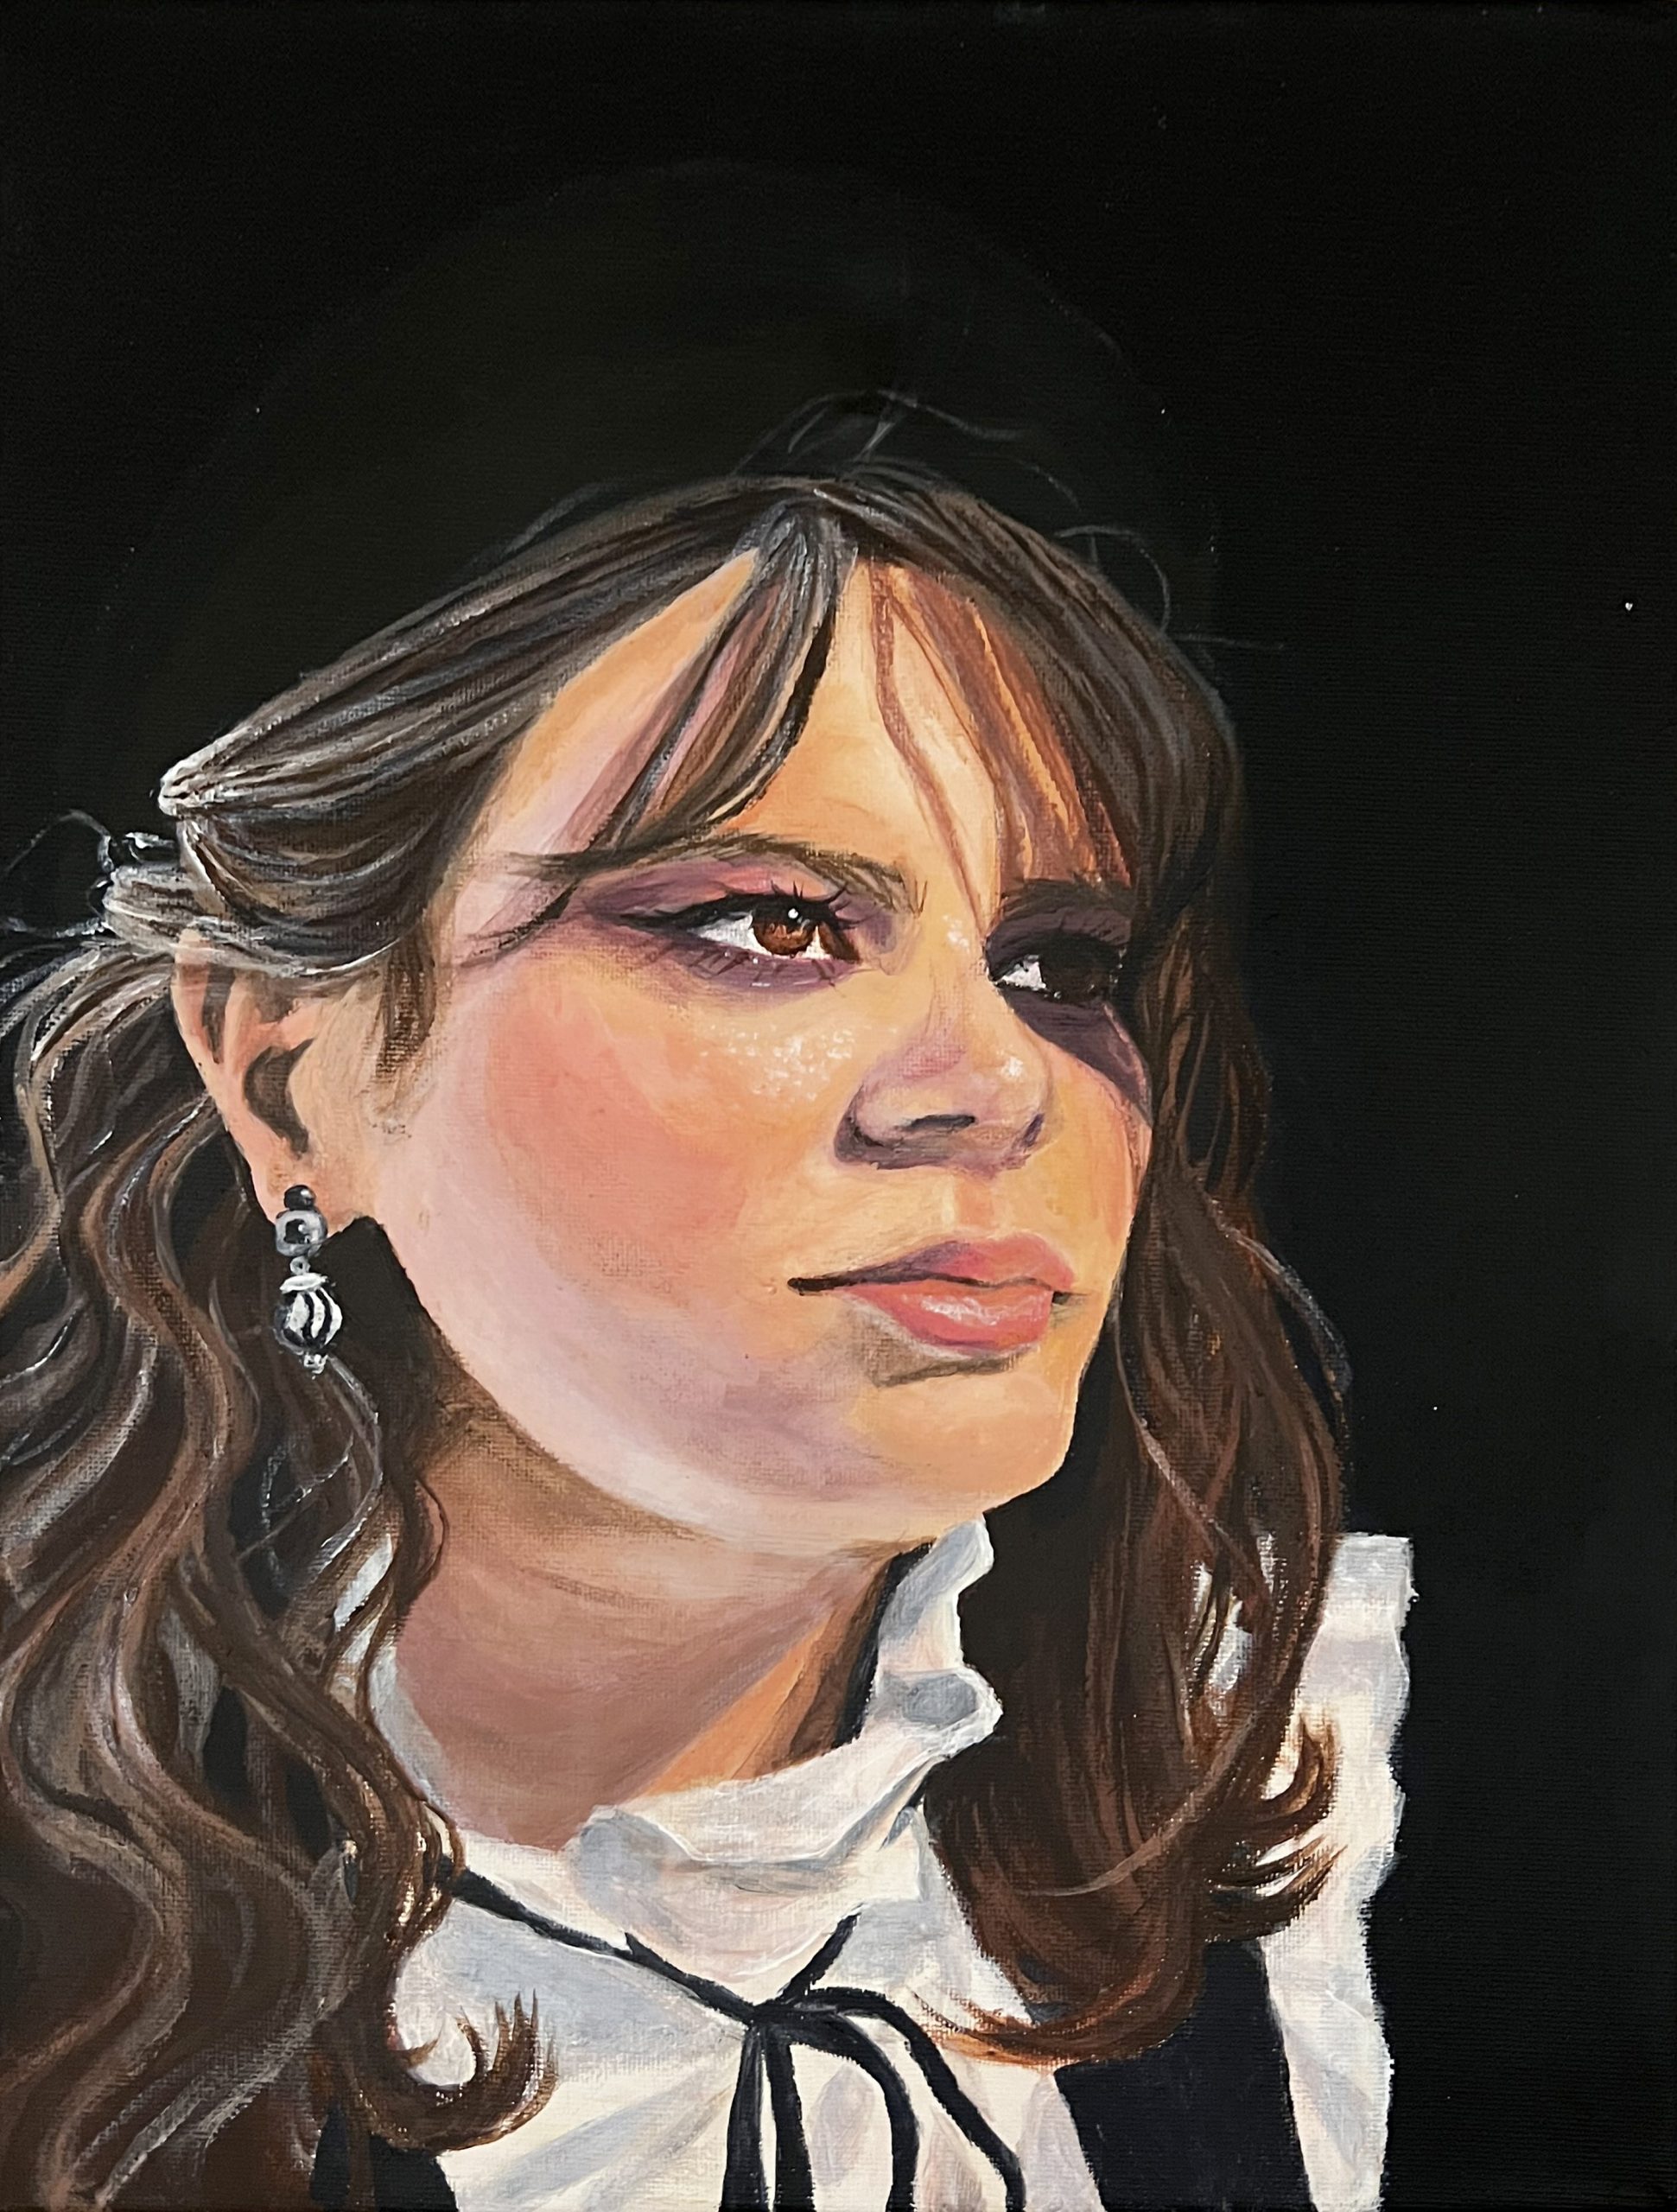 A portrait of a woman in a white blouse with a thing black ribbon tied in a bow around the collar. She is wearing silver earrings, winged eyeliner, and purple eyeshadow. Her brown wavy hair casts deep shadows across her face and she is against a matte black background.